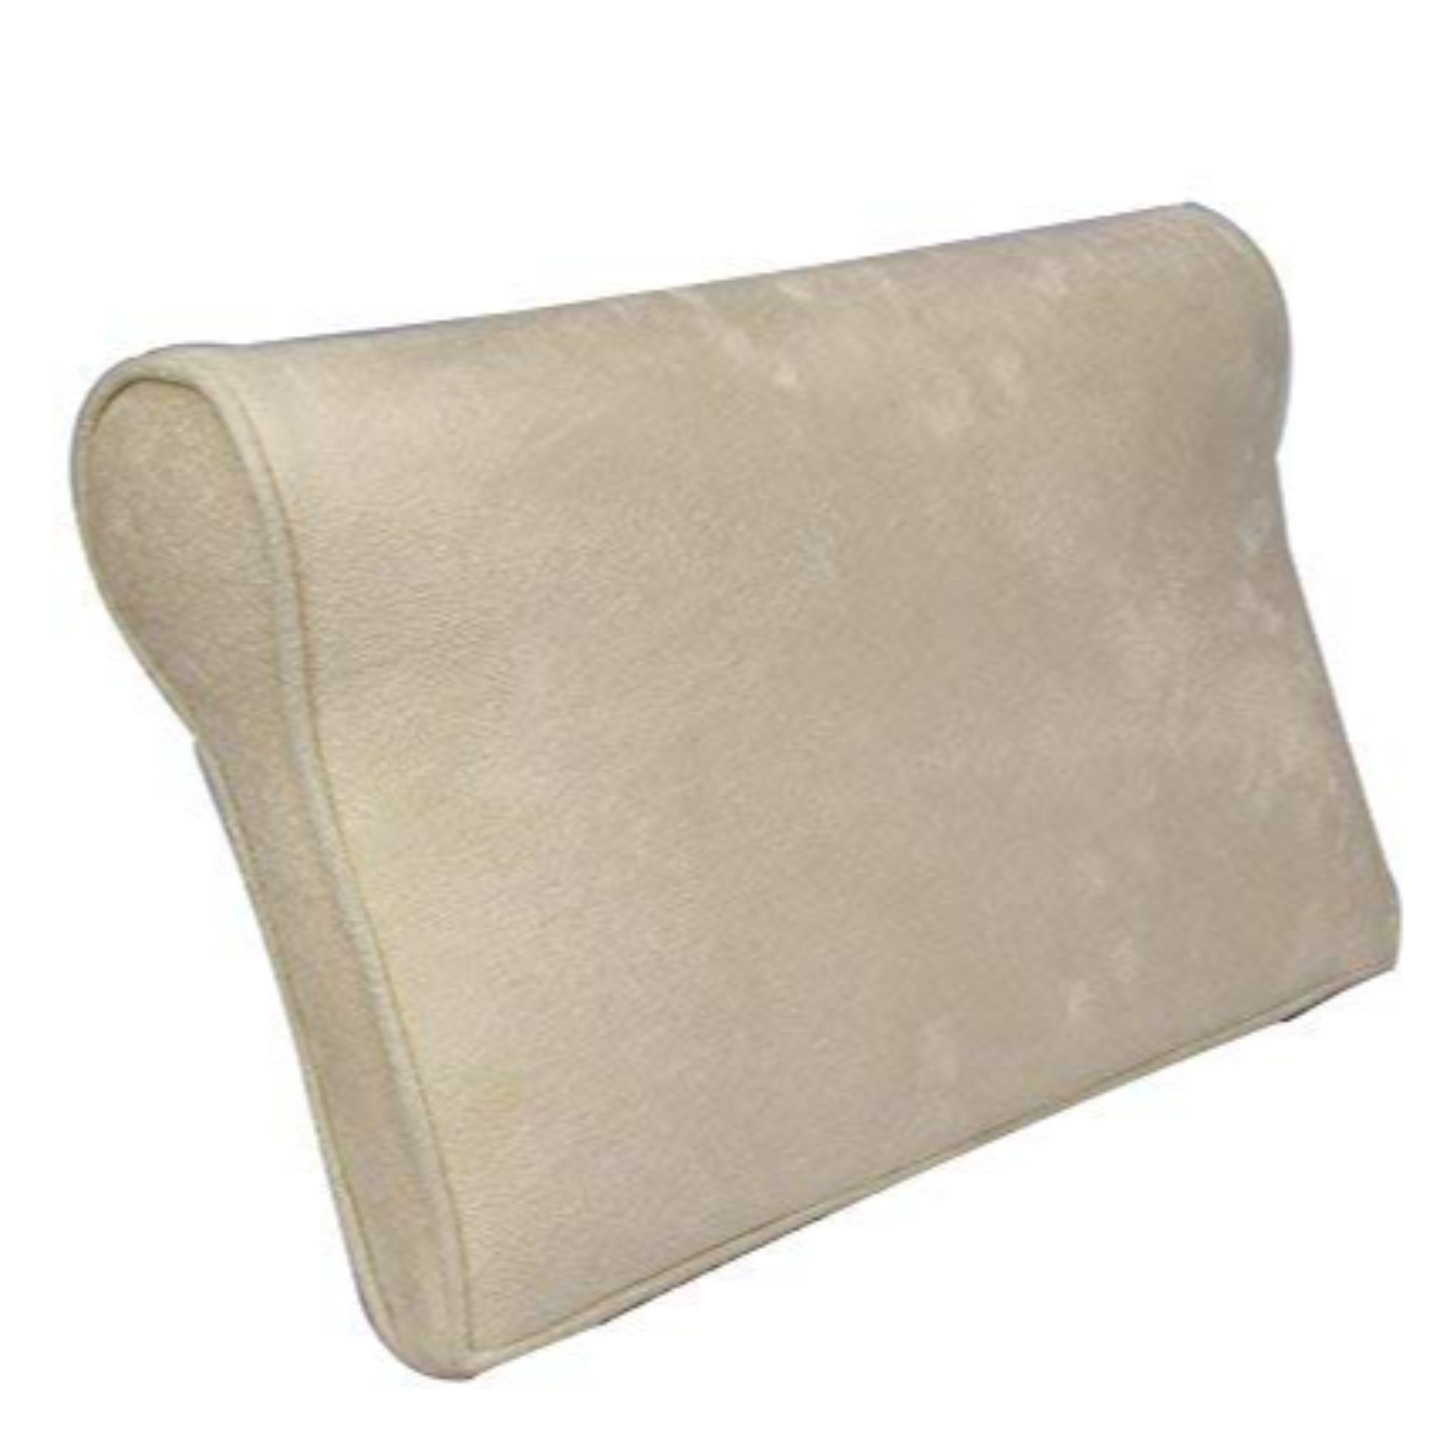 Orthosafe Cervical Pillow